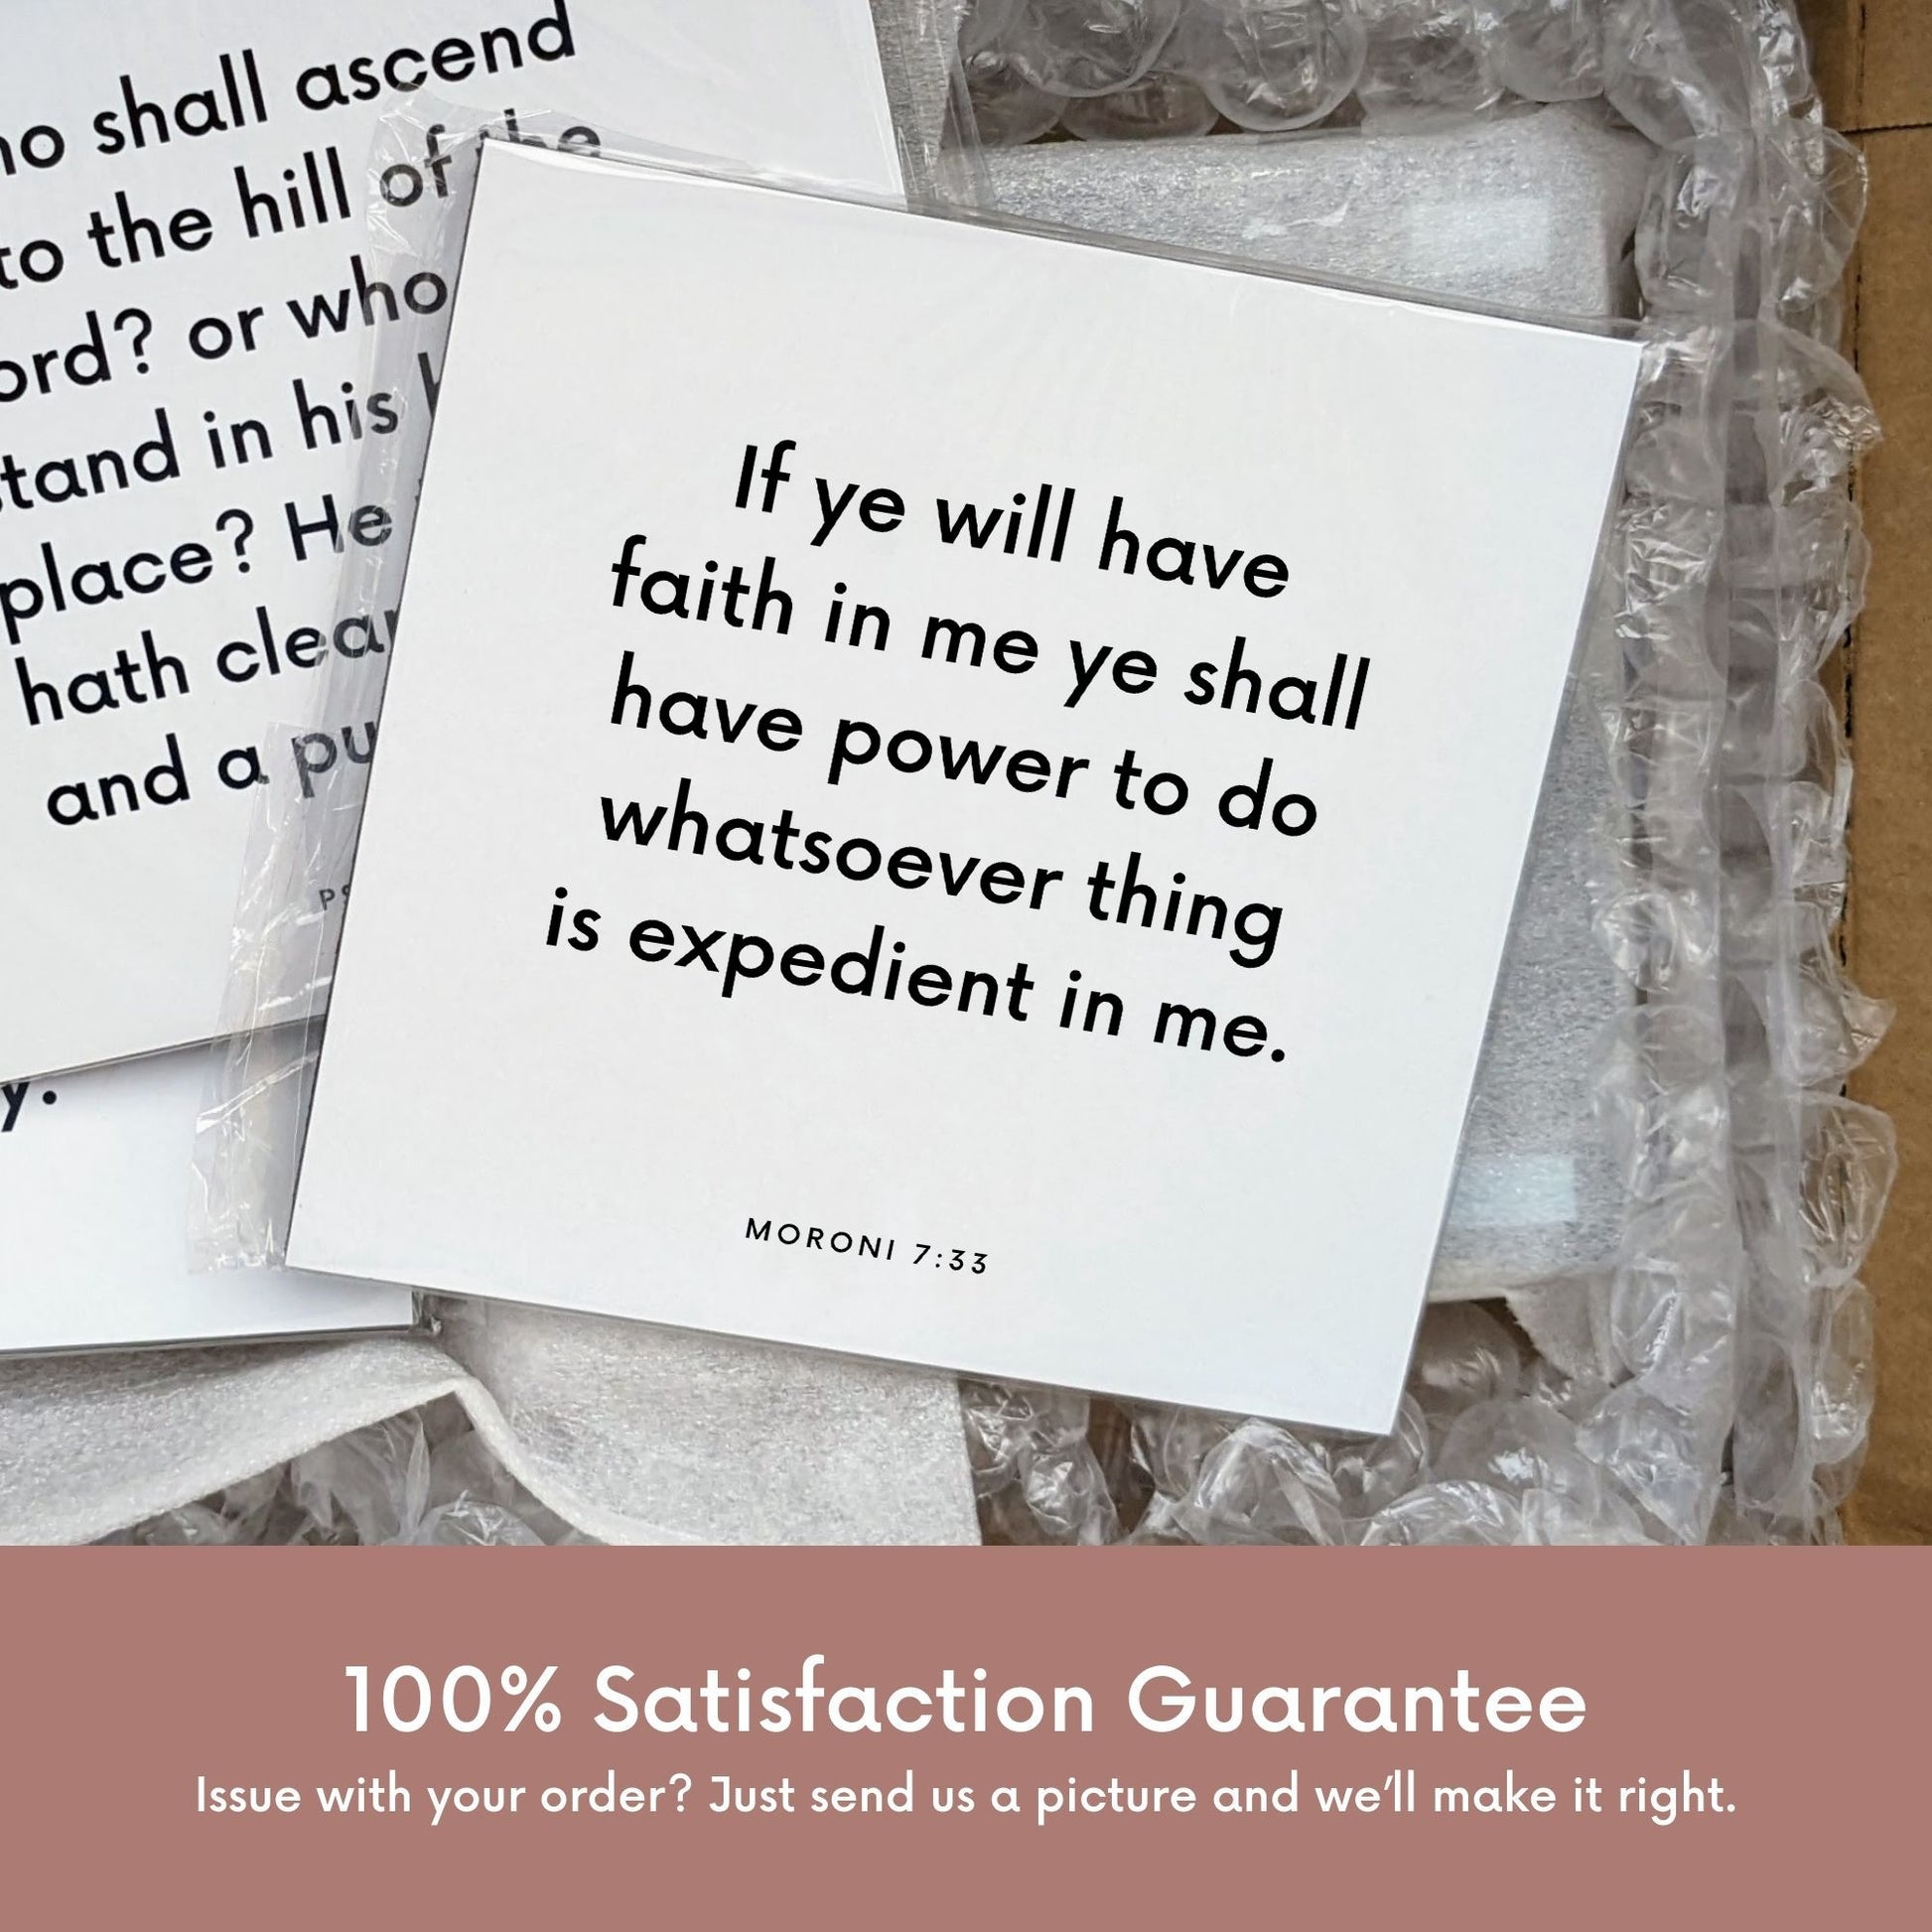 Shipping materials for scripture tile of Moroni 7:33 - "If ye will have faith in me ye shall have power"